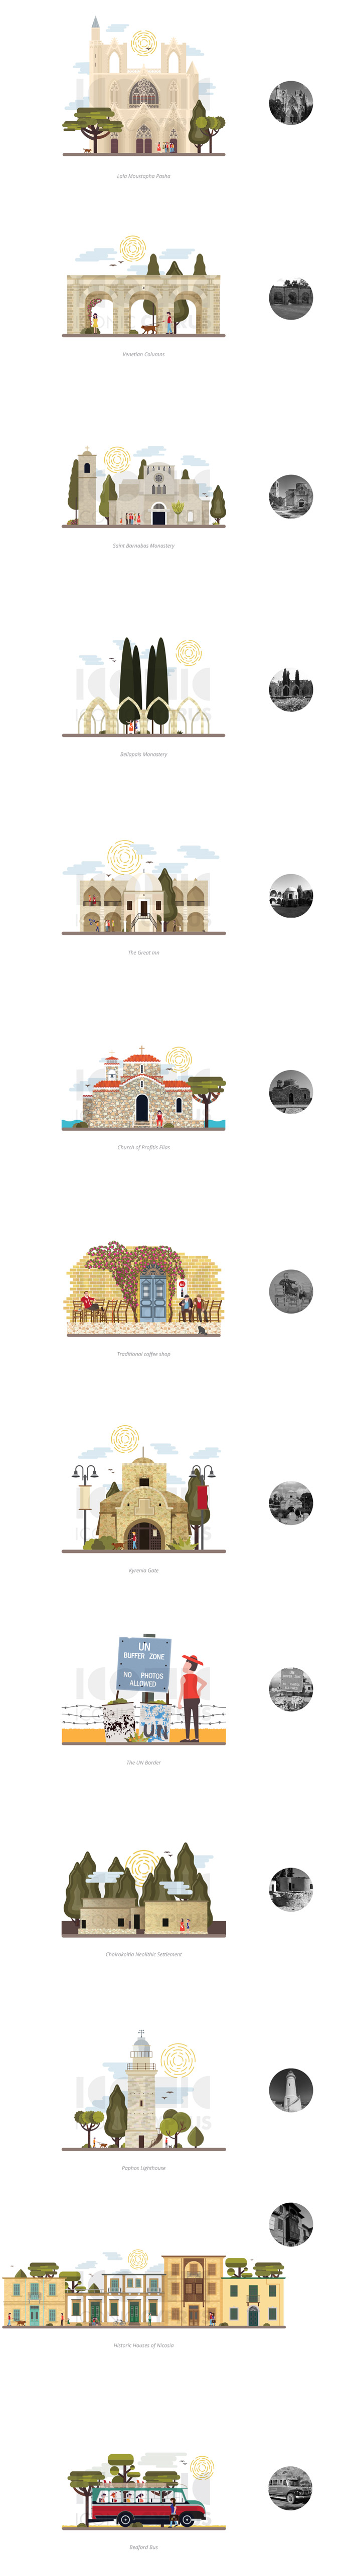 Illustrations of iconic landmarks and tourist attractions in Cyprus.